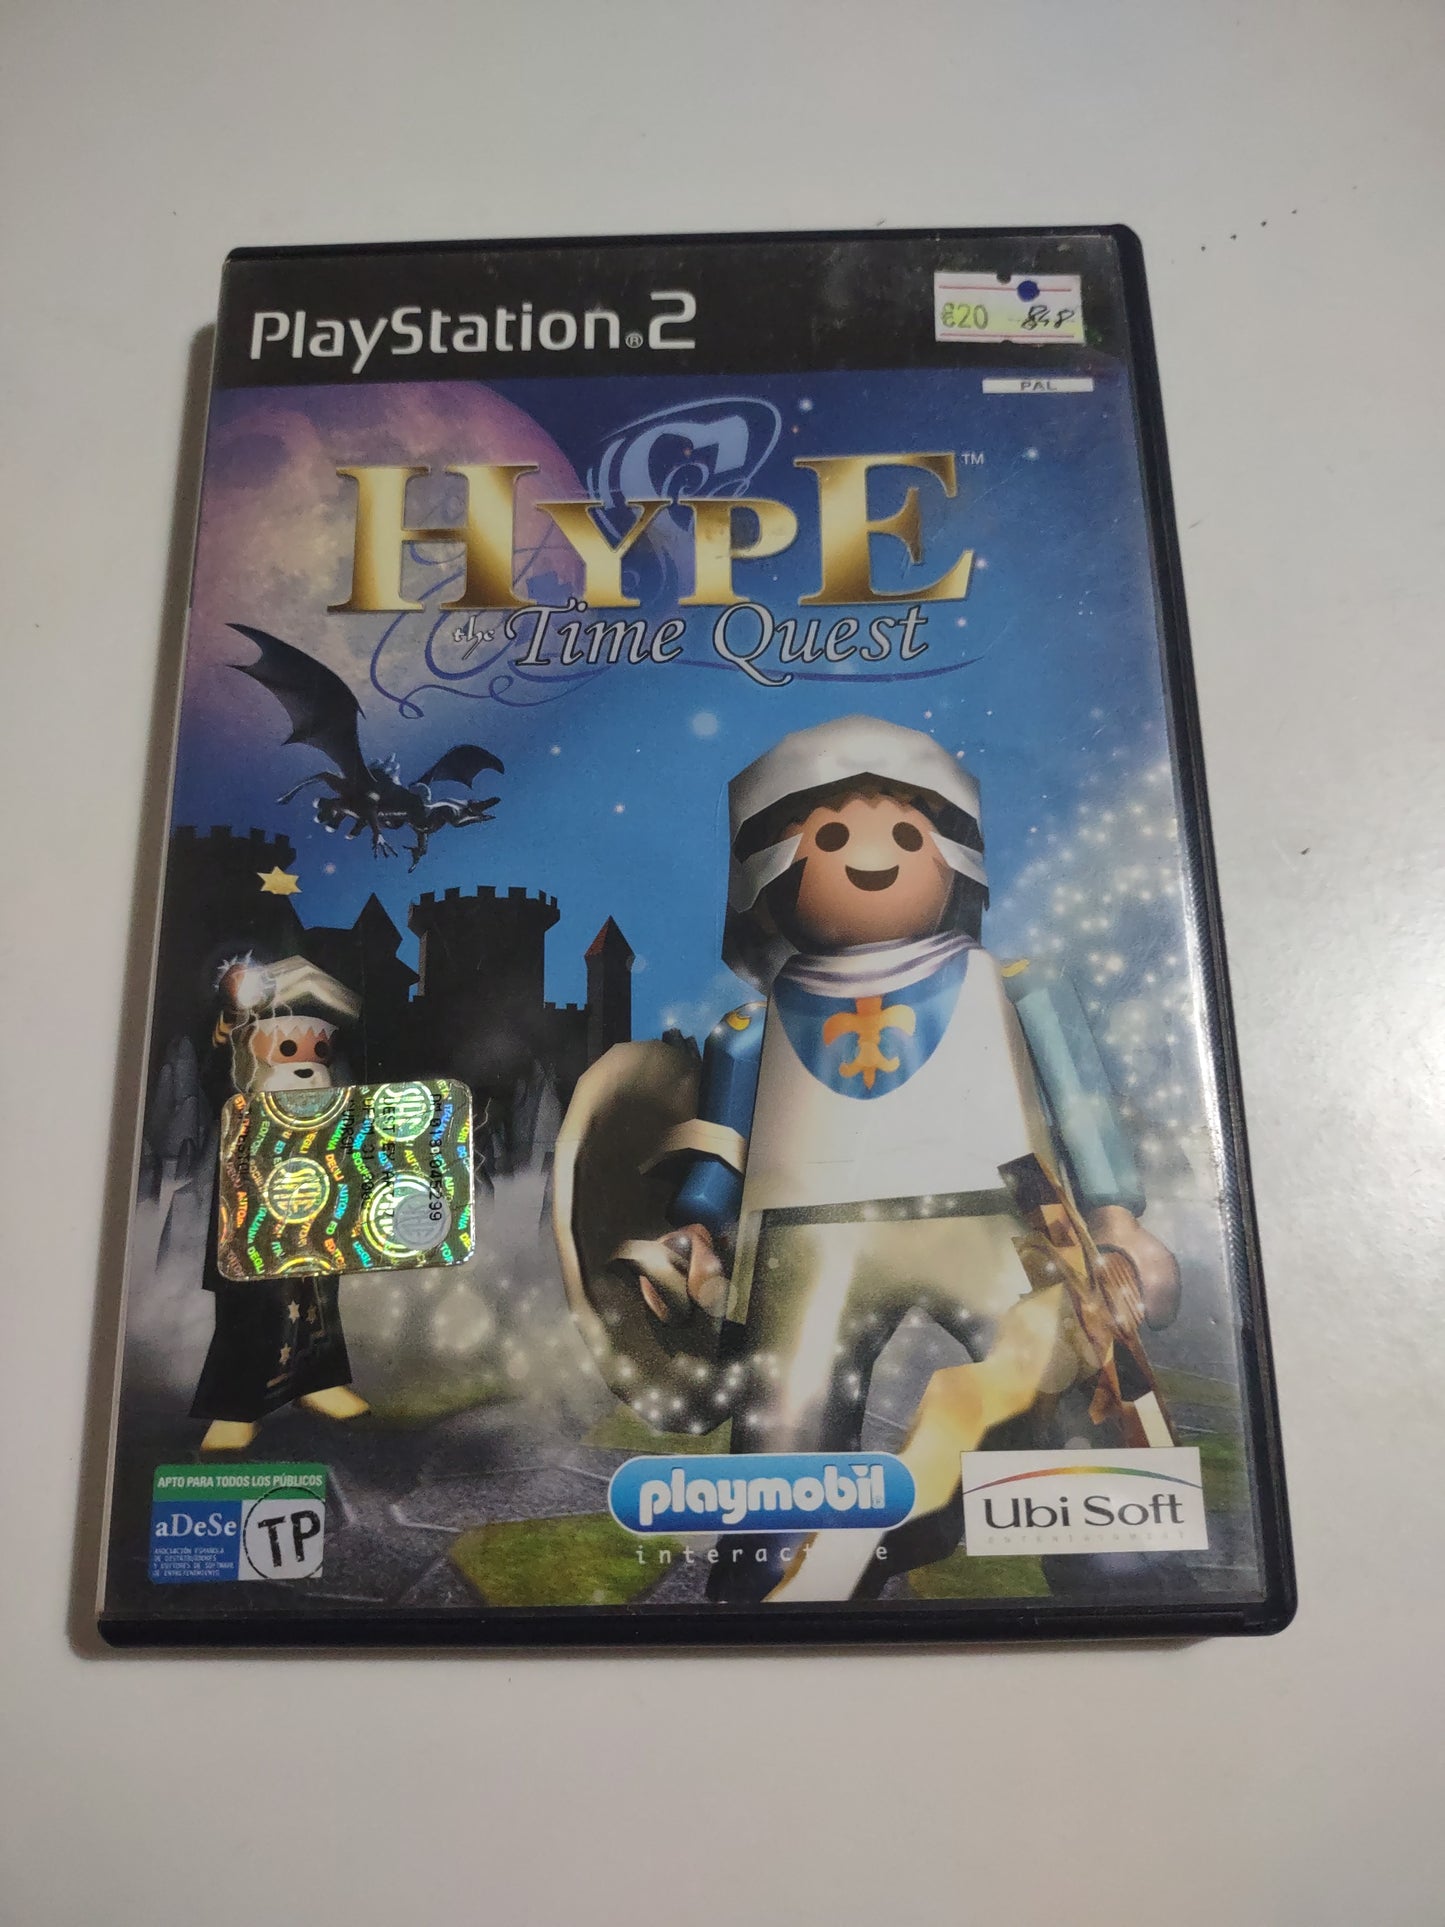 Gioco PlayStation 2 Ps2 hype the time quest